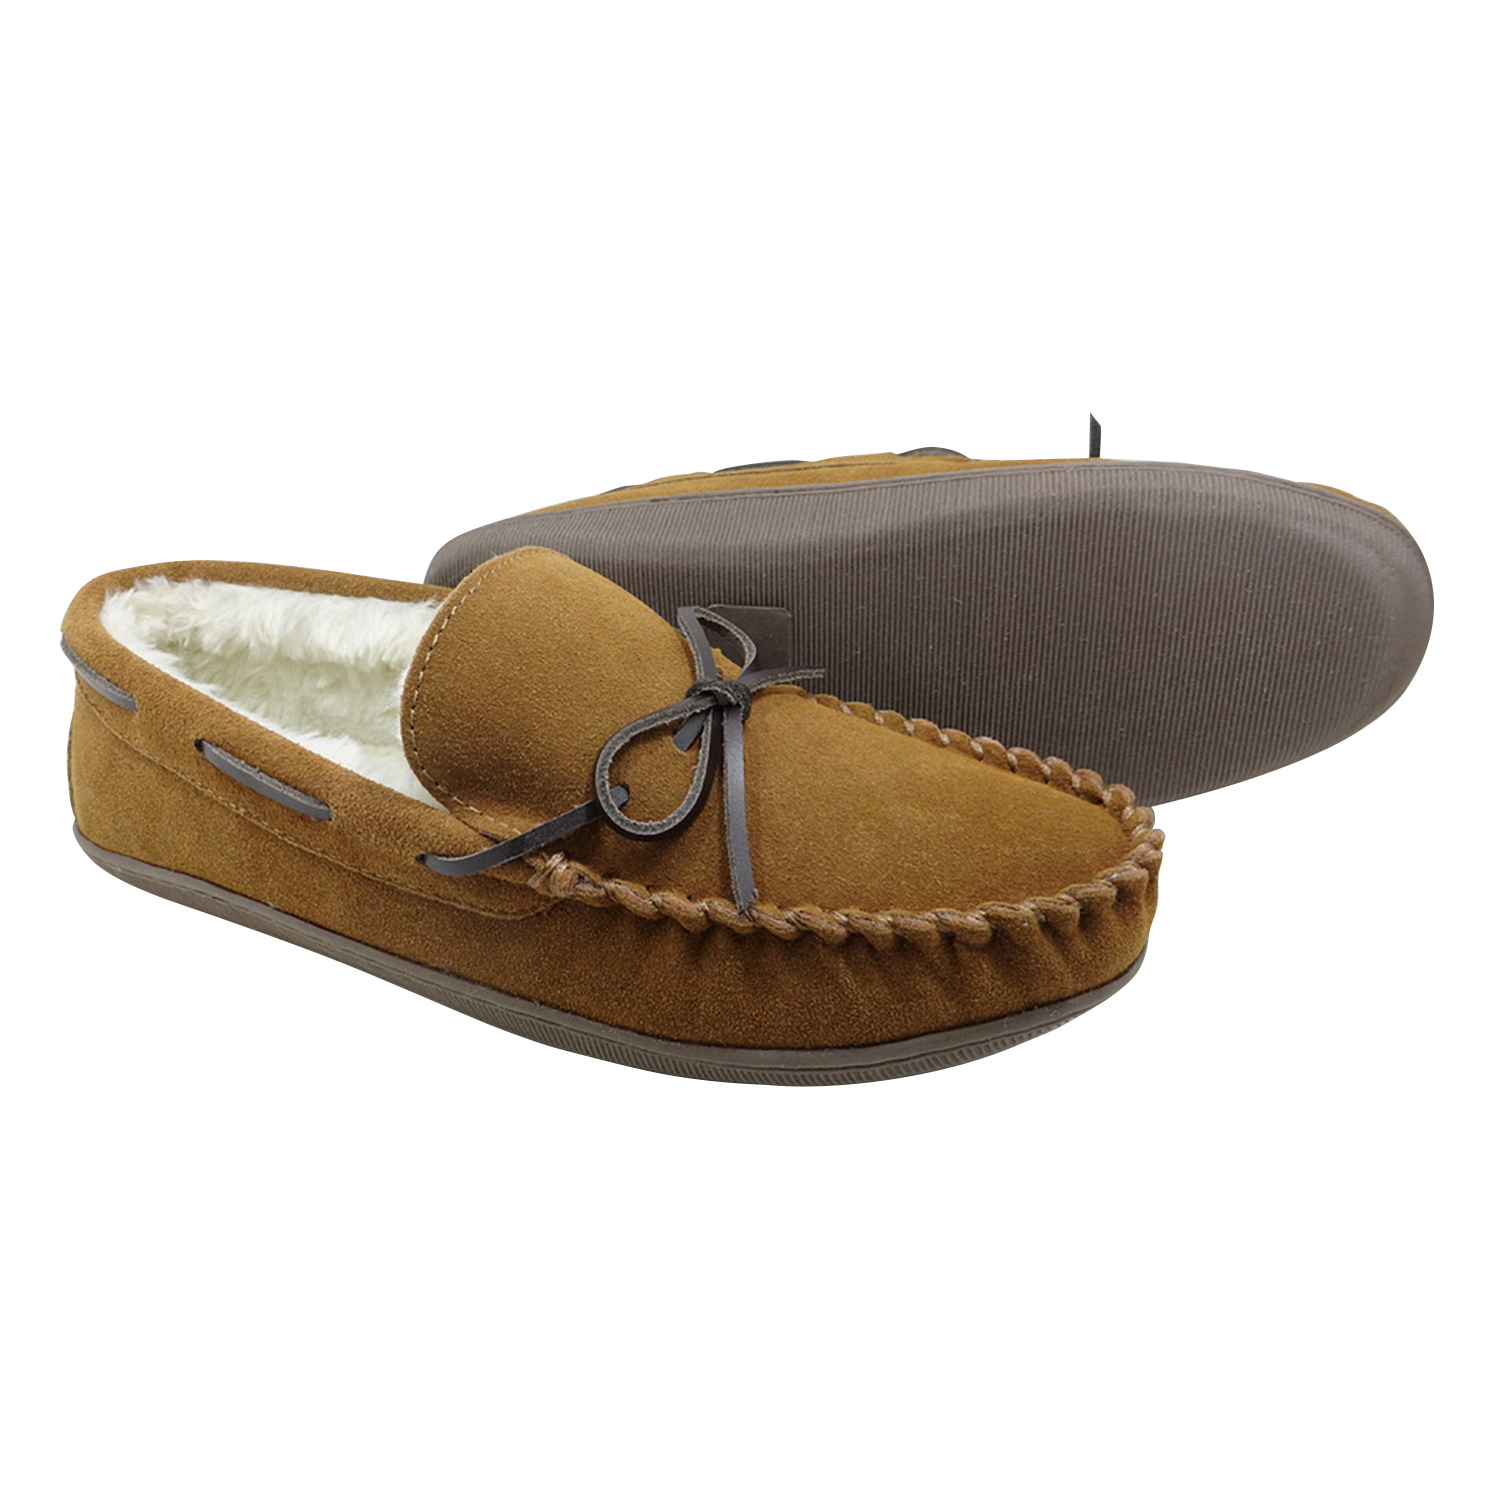 Men's Suede Leather Laced Softsole Moccasins